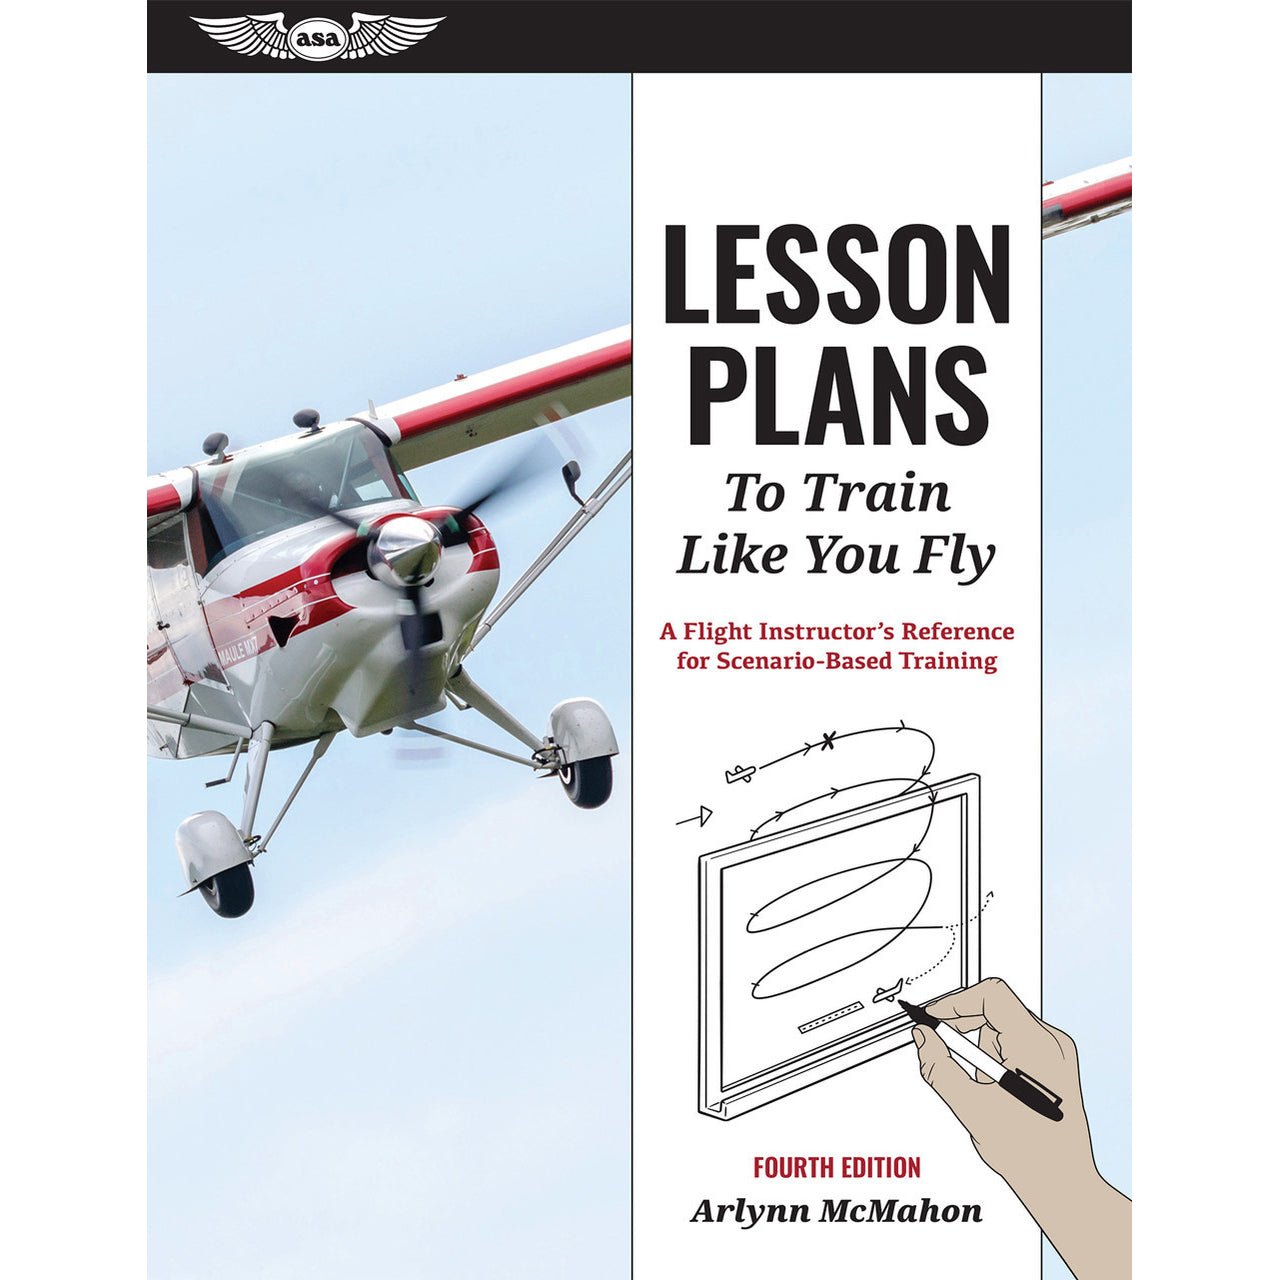 ASA Lesson Plans to Train Like You Fly, Fourth Edition - PilotMall.com